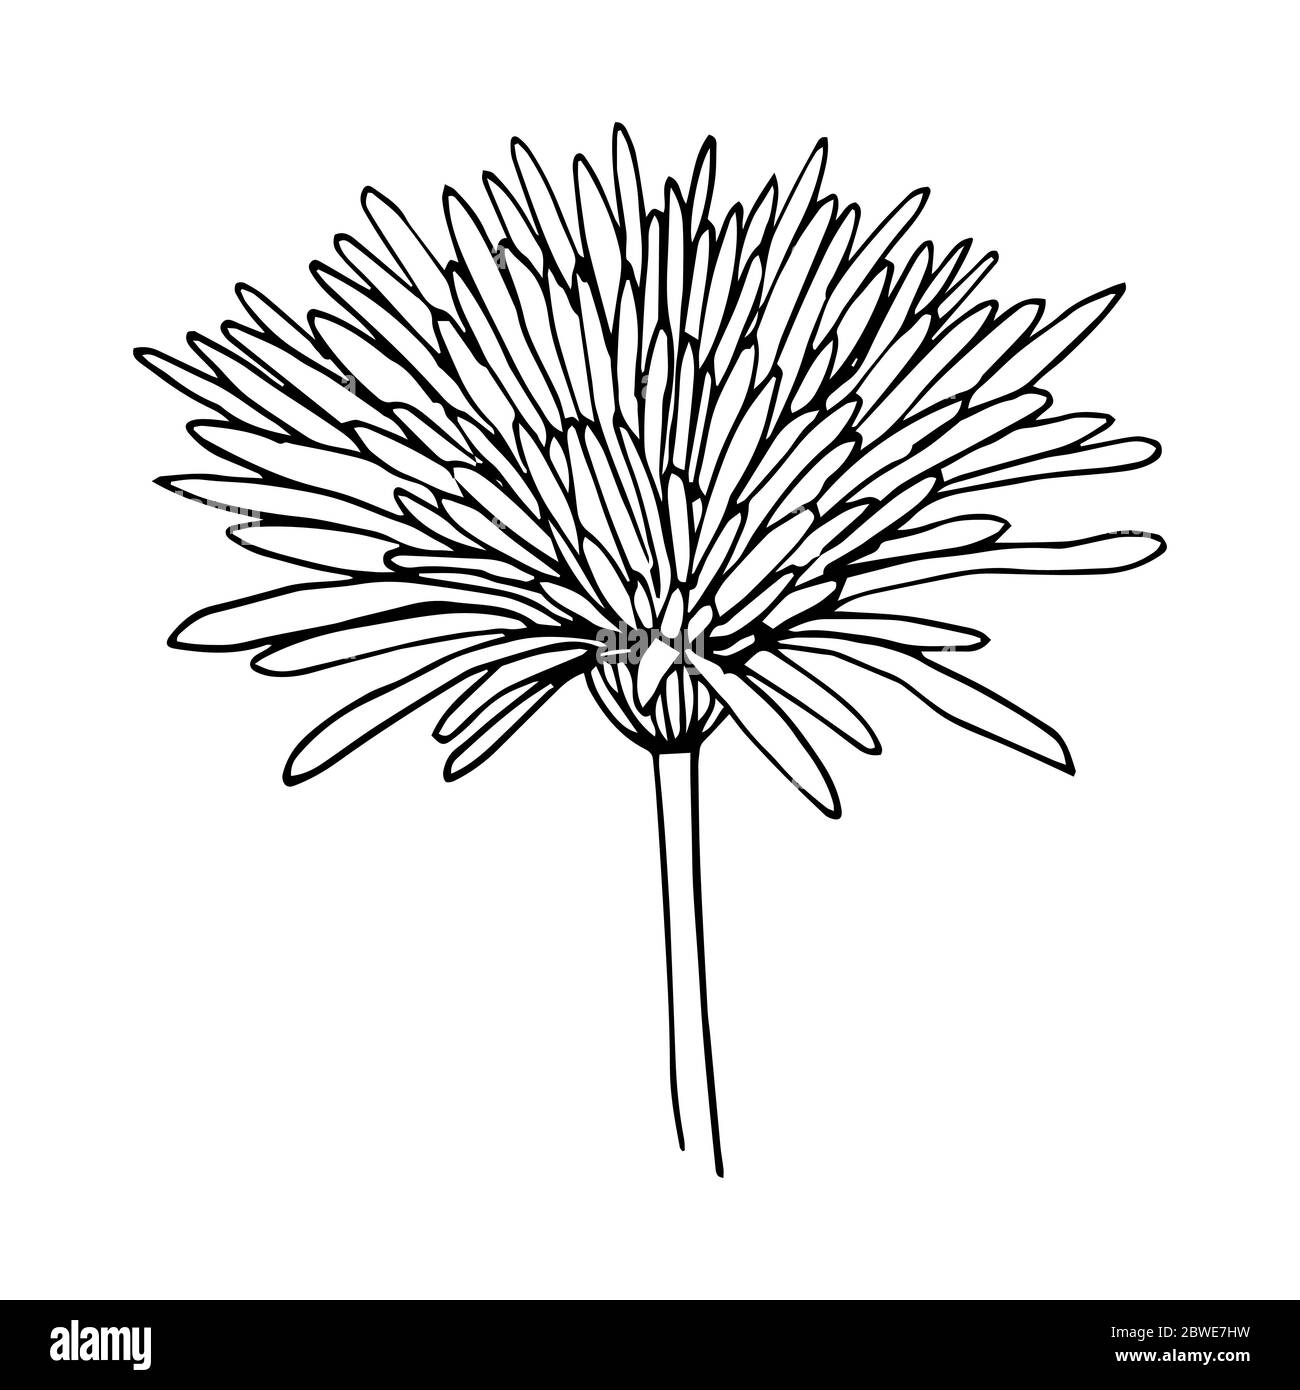 Chrysanthemum variety Anabel side view black outline isolated on white background, stock vector illustration for design and decor, prints, logo, stick Stock Vector